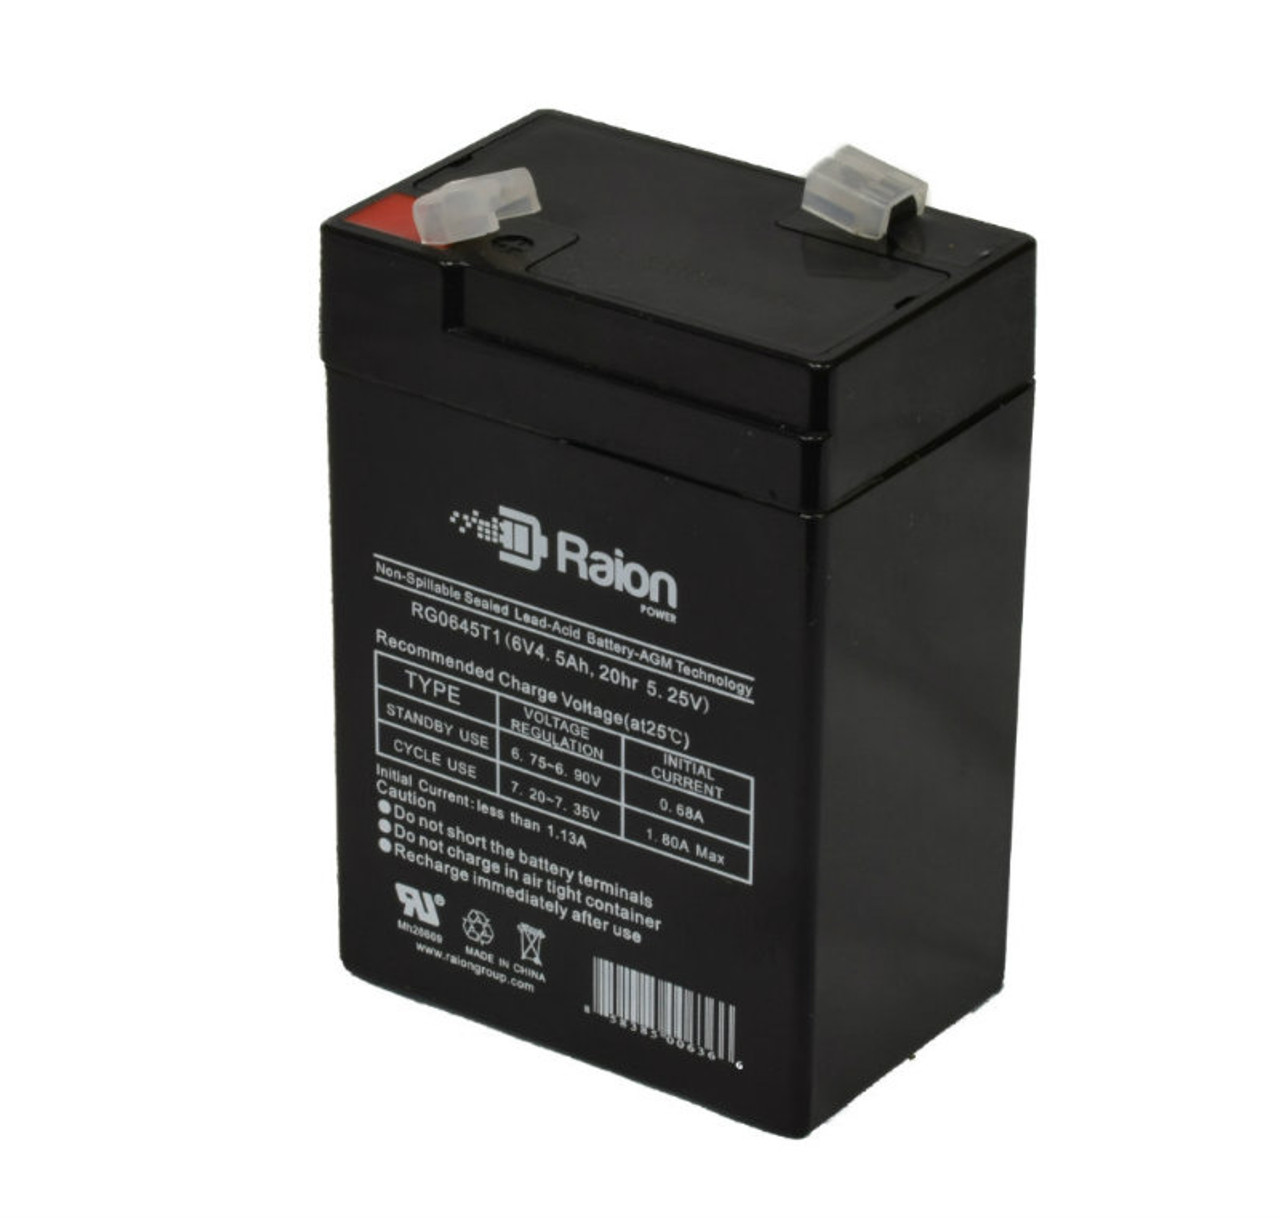 Raion Power RG0645T1 6V 4.5Ah Replacement Battery Cartridge for Dual-Lite Freedom LED Series